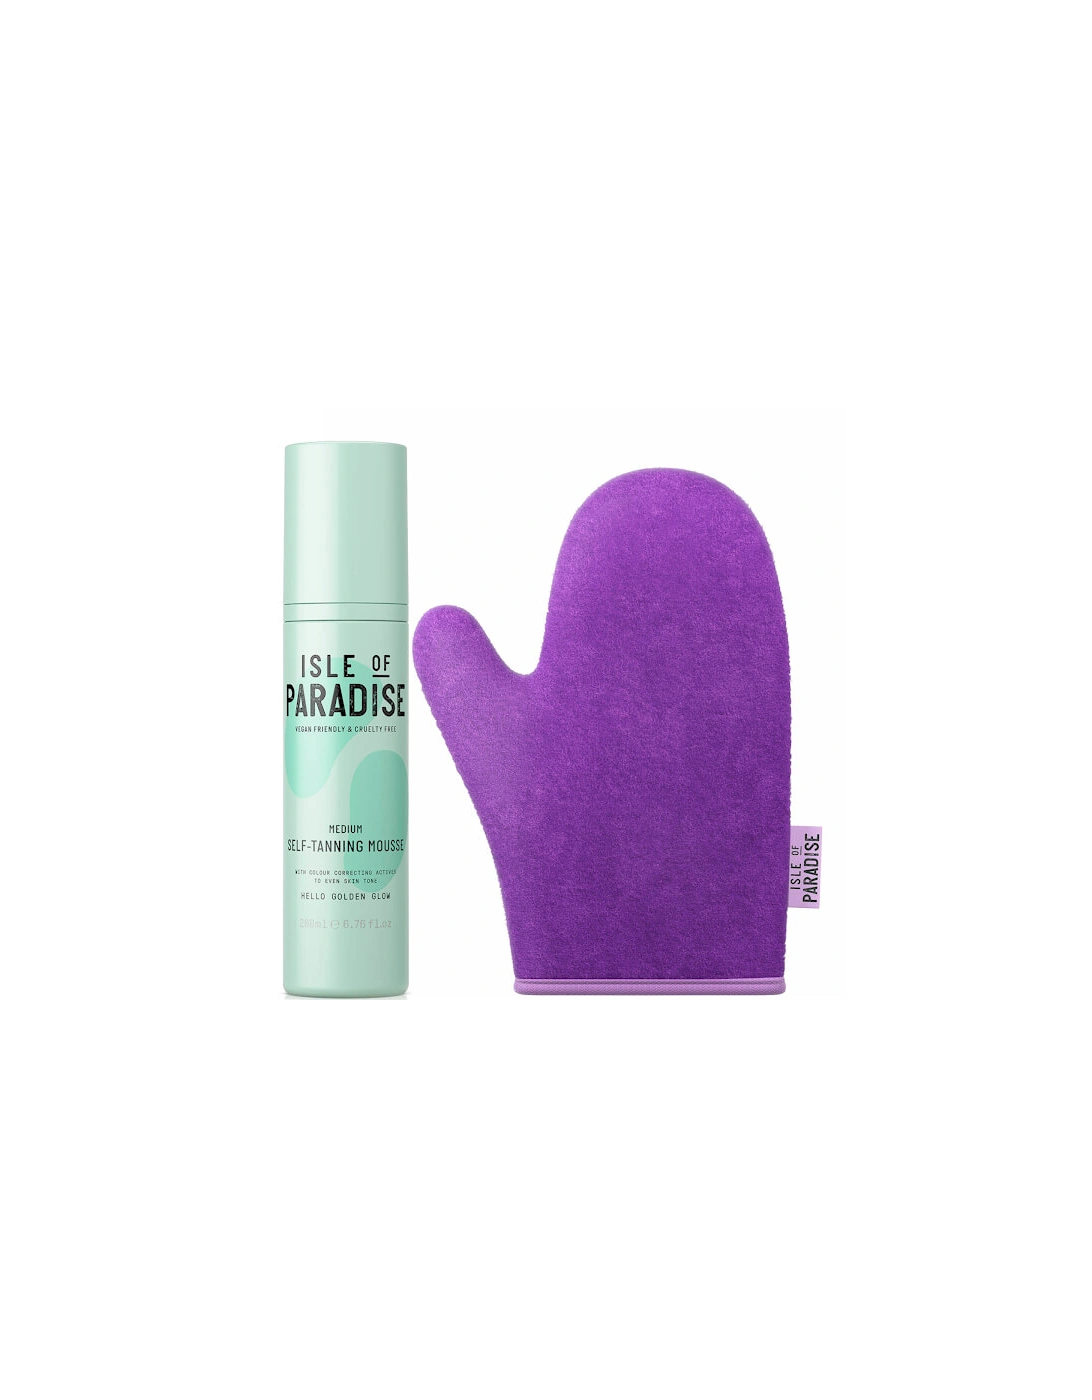 Medium Self-Tanning Mousse and Double Sided Mitt Bundle, 2 of 1